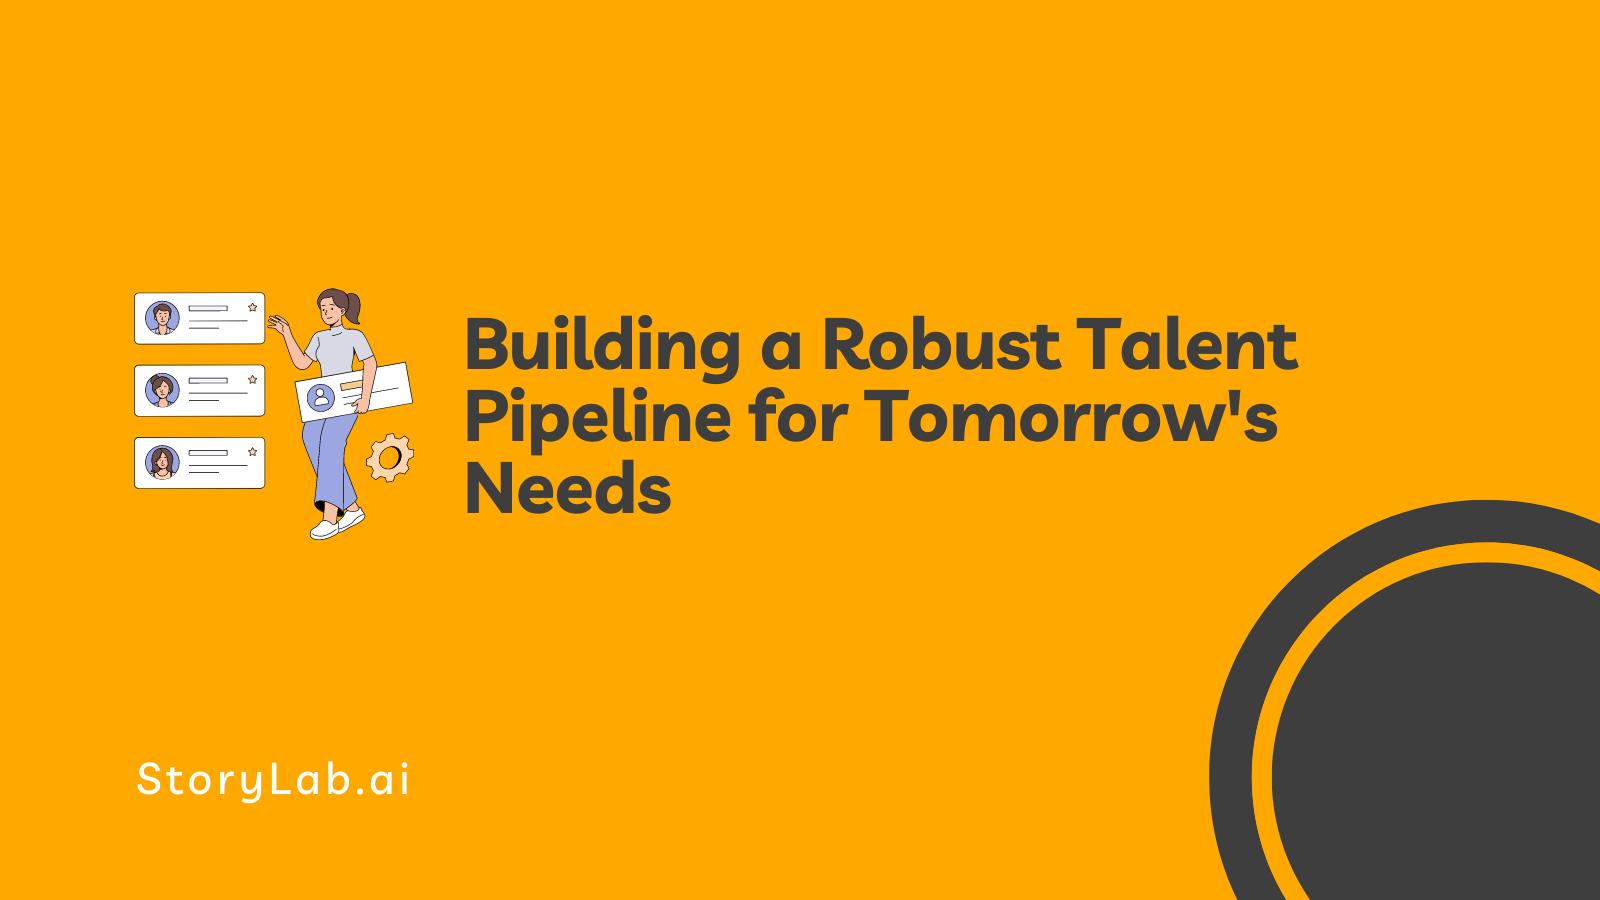 Building a Robust Talent Pipeline for Tomorrow's Needs